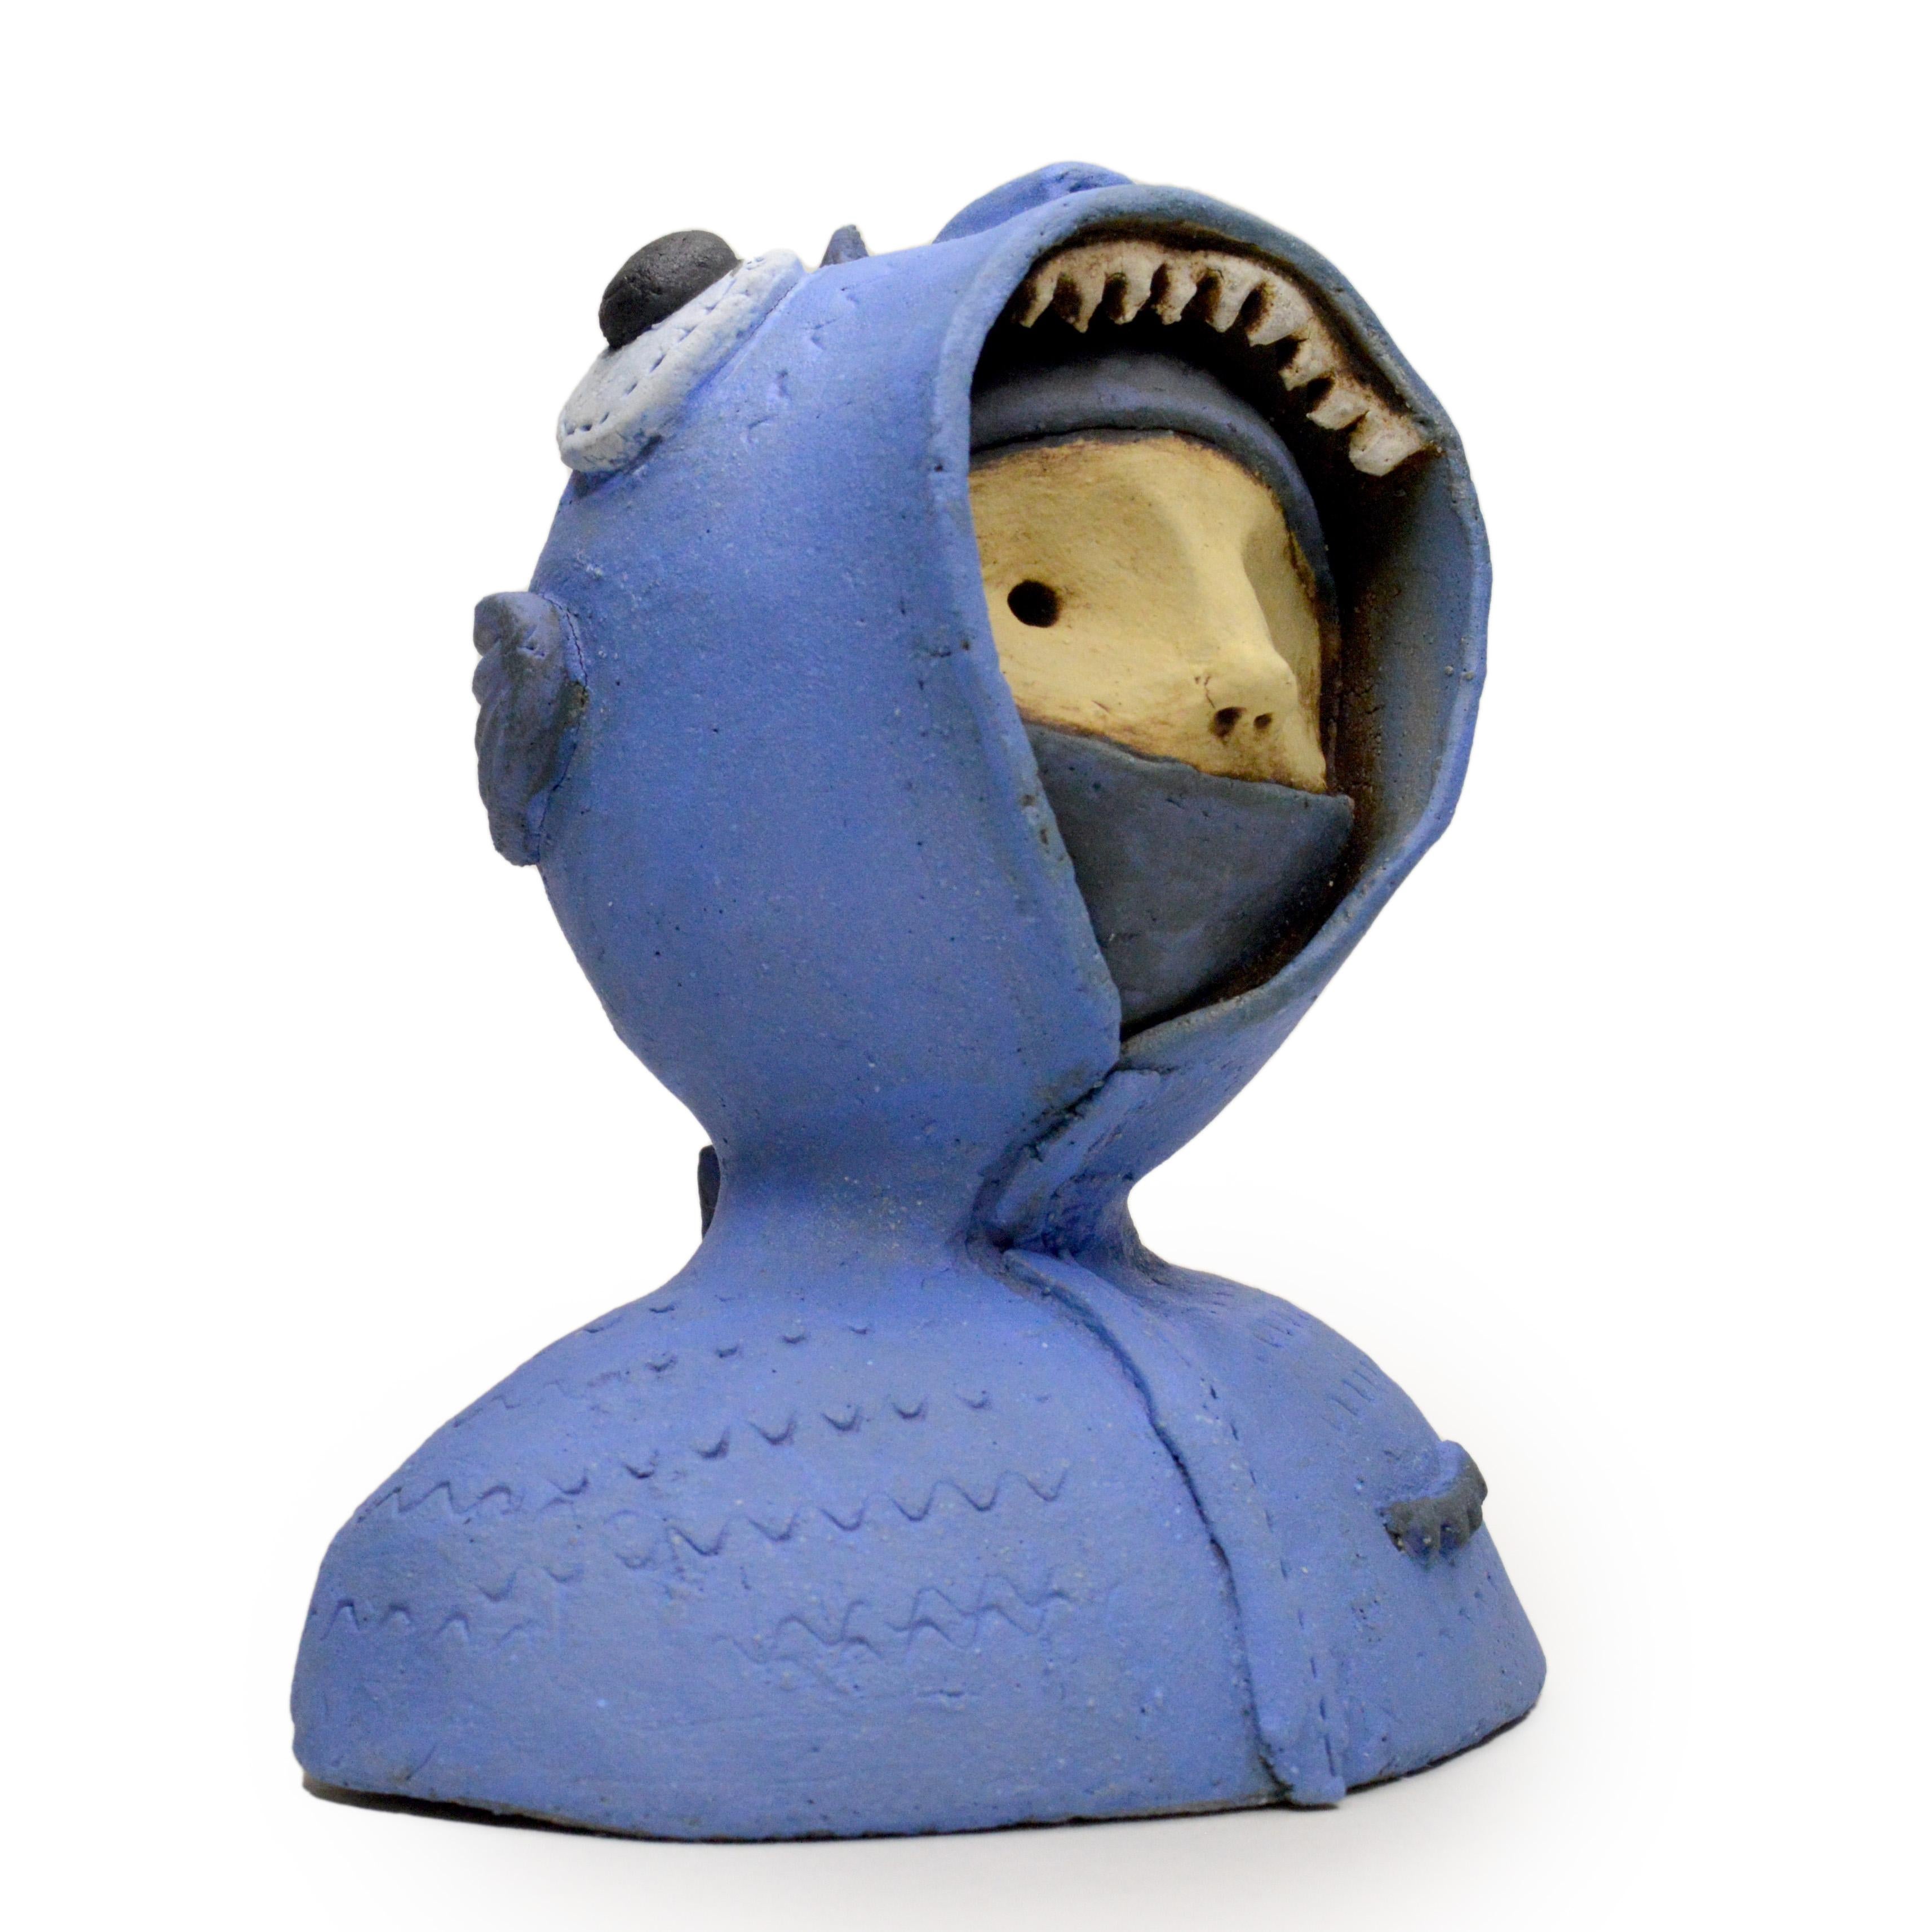 Pineco number 0019 Original Ceramic sculpture with a fish hoodie

Meet a variety of characters with distinct masks and postures. These sculptures are fascinating and make you curious, encouraging you to explore the intricate world of human emotions.